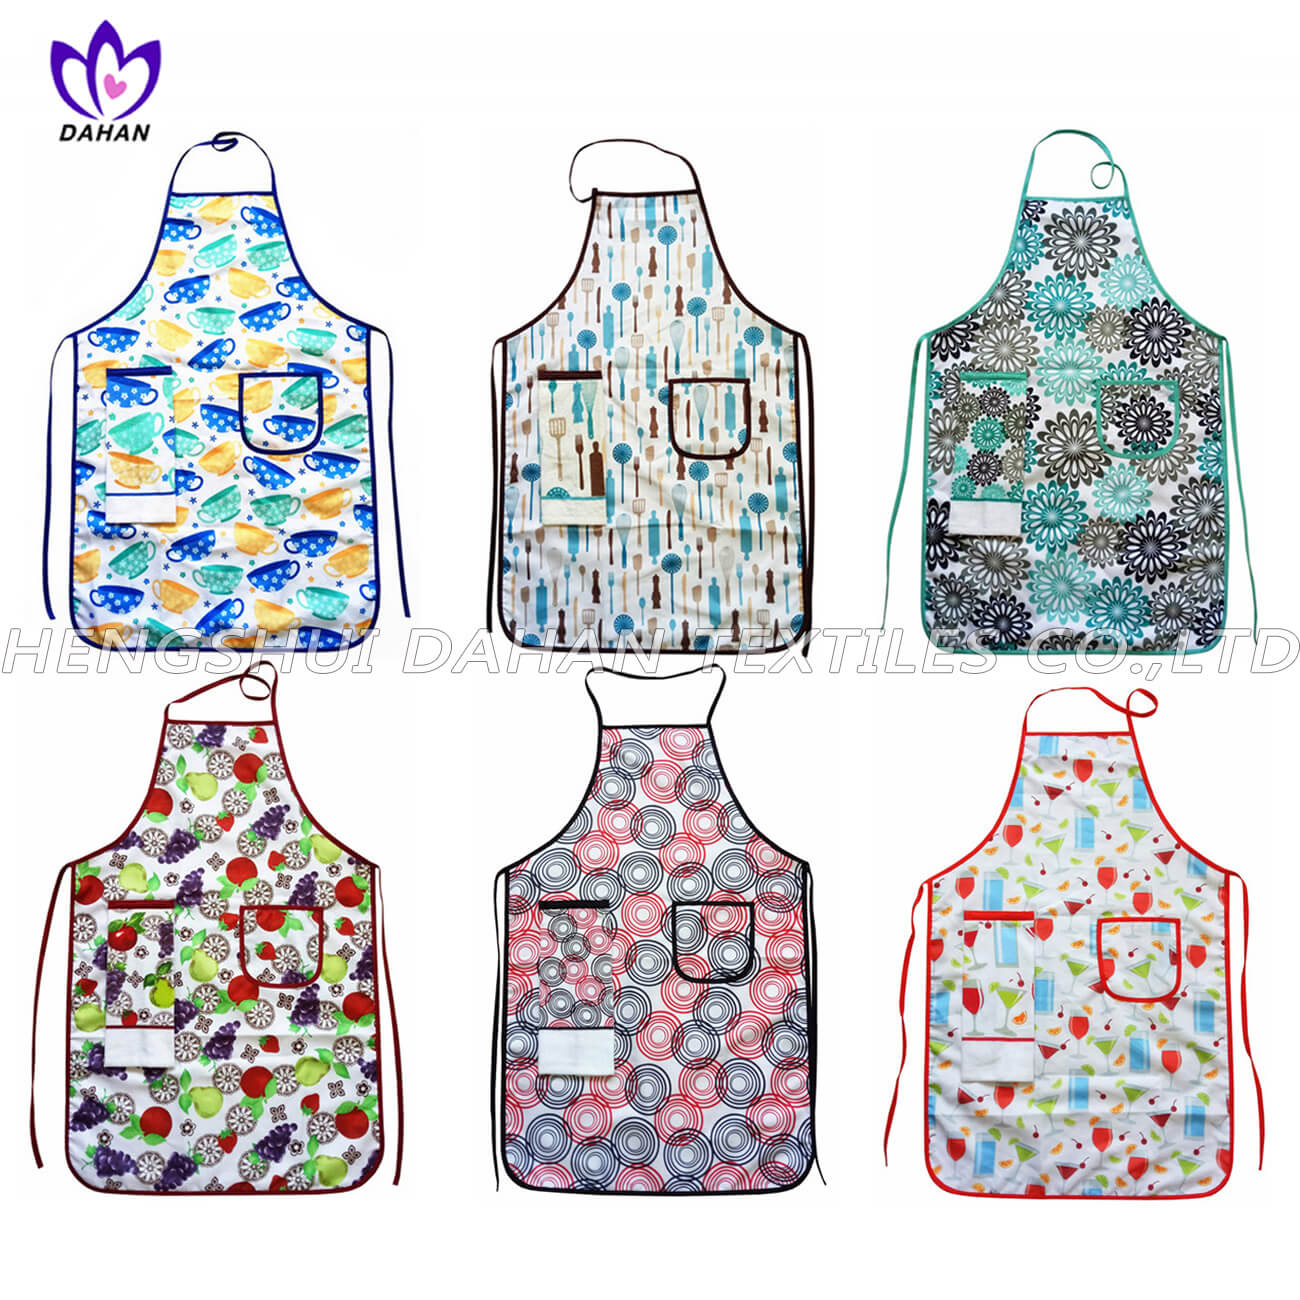 100% Polyester printing apron with towel.